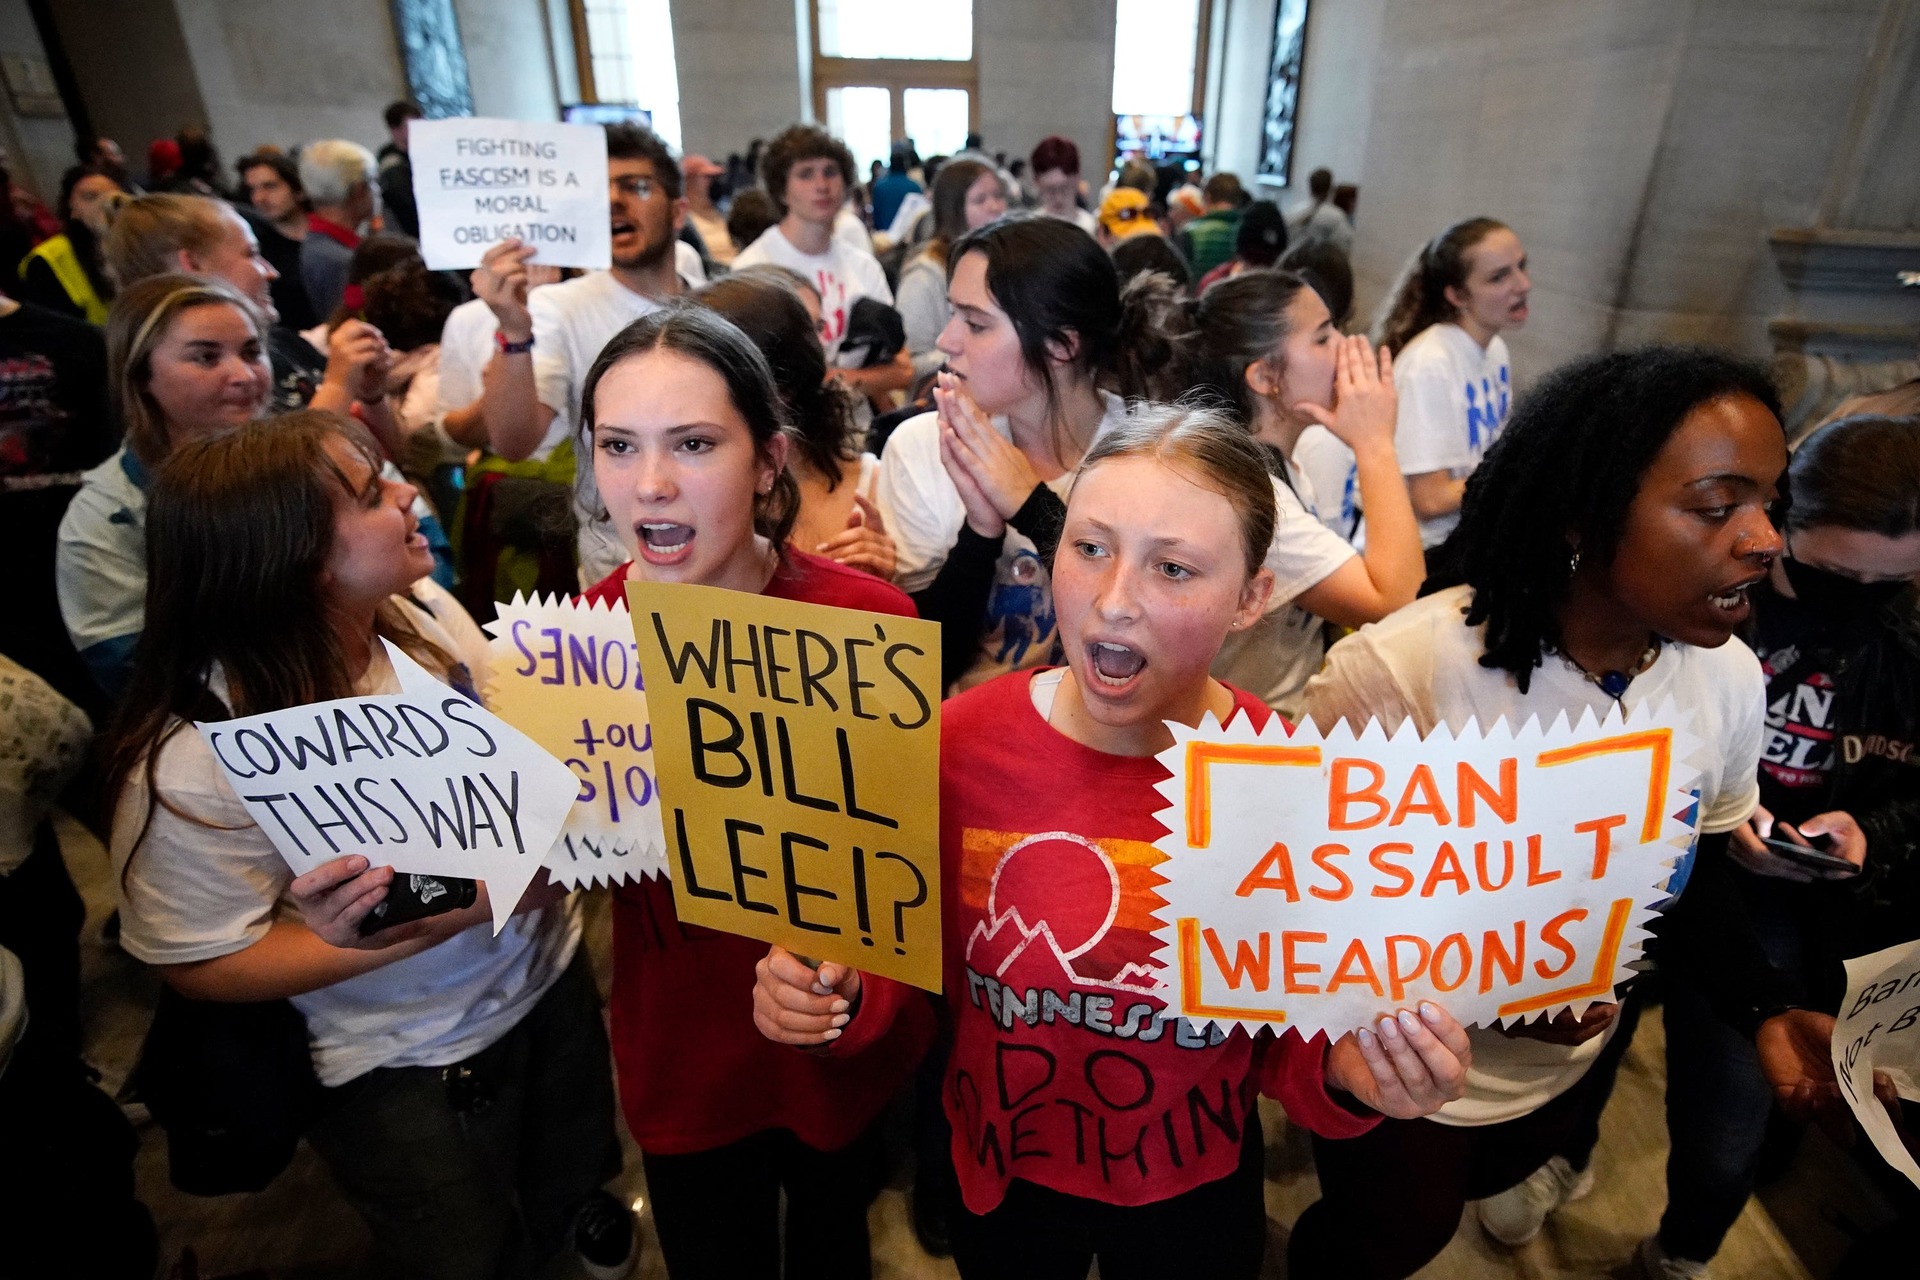 Students yell, asking for gun reform legislation in support of the Tennessee Three outside the House chamber on Thursday in Nashville.